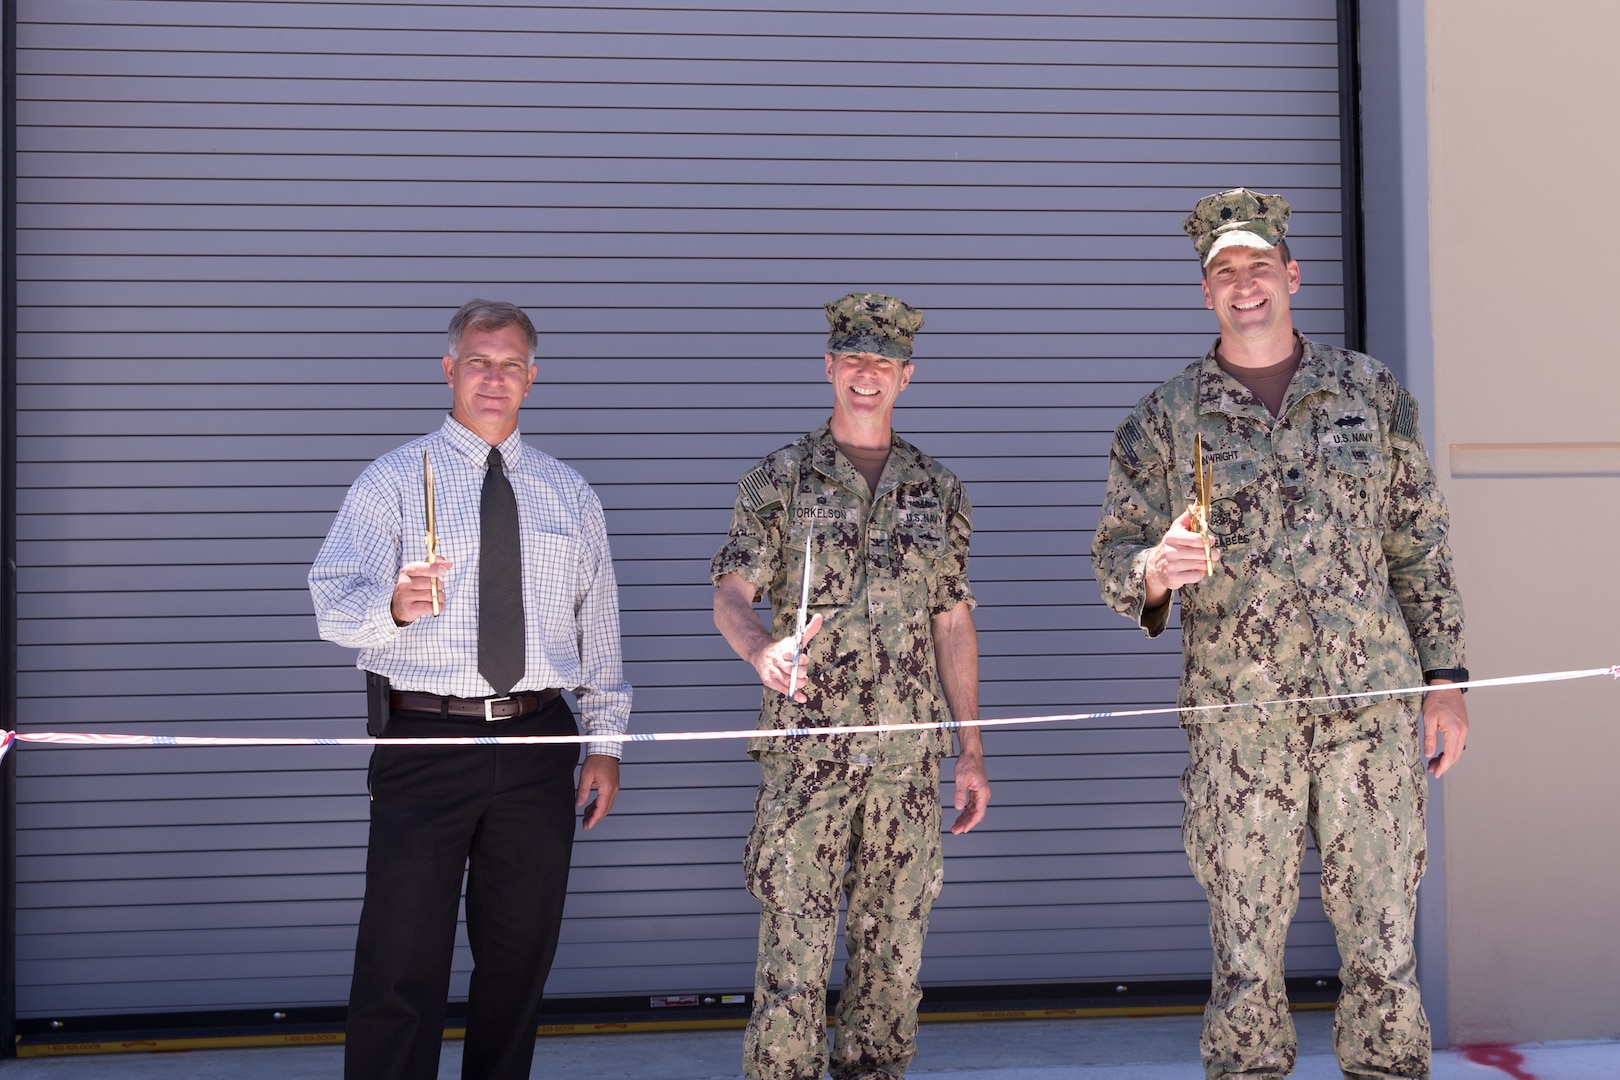 Norfolk Naval Shipyard dedicates its new Submarine Maintenance Facility June 14, consolidating submarine maintenance, production and support shops into a single facility adjacent to the shipyard's submarine drydocks and piers.  Participating in the ribbon-cutting from left to right are NNSY Submarine Program Manager Pat Ensley, Shipyard Commander Captain Kai Torkelson, and NAVFAC Public Works Officer Commander Ben Wainwright.